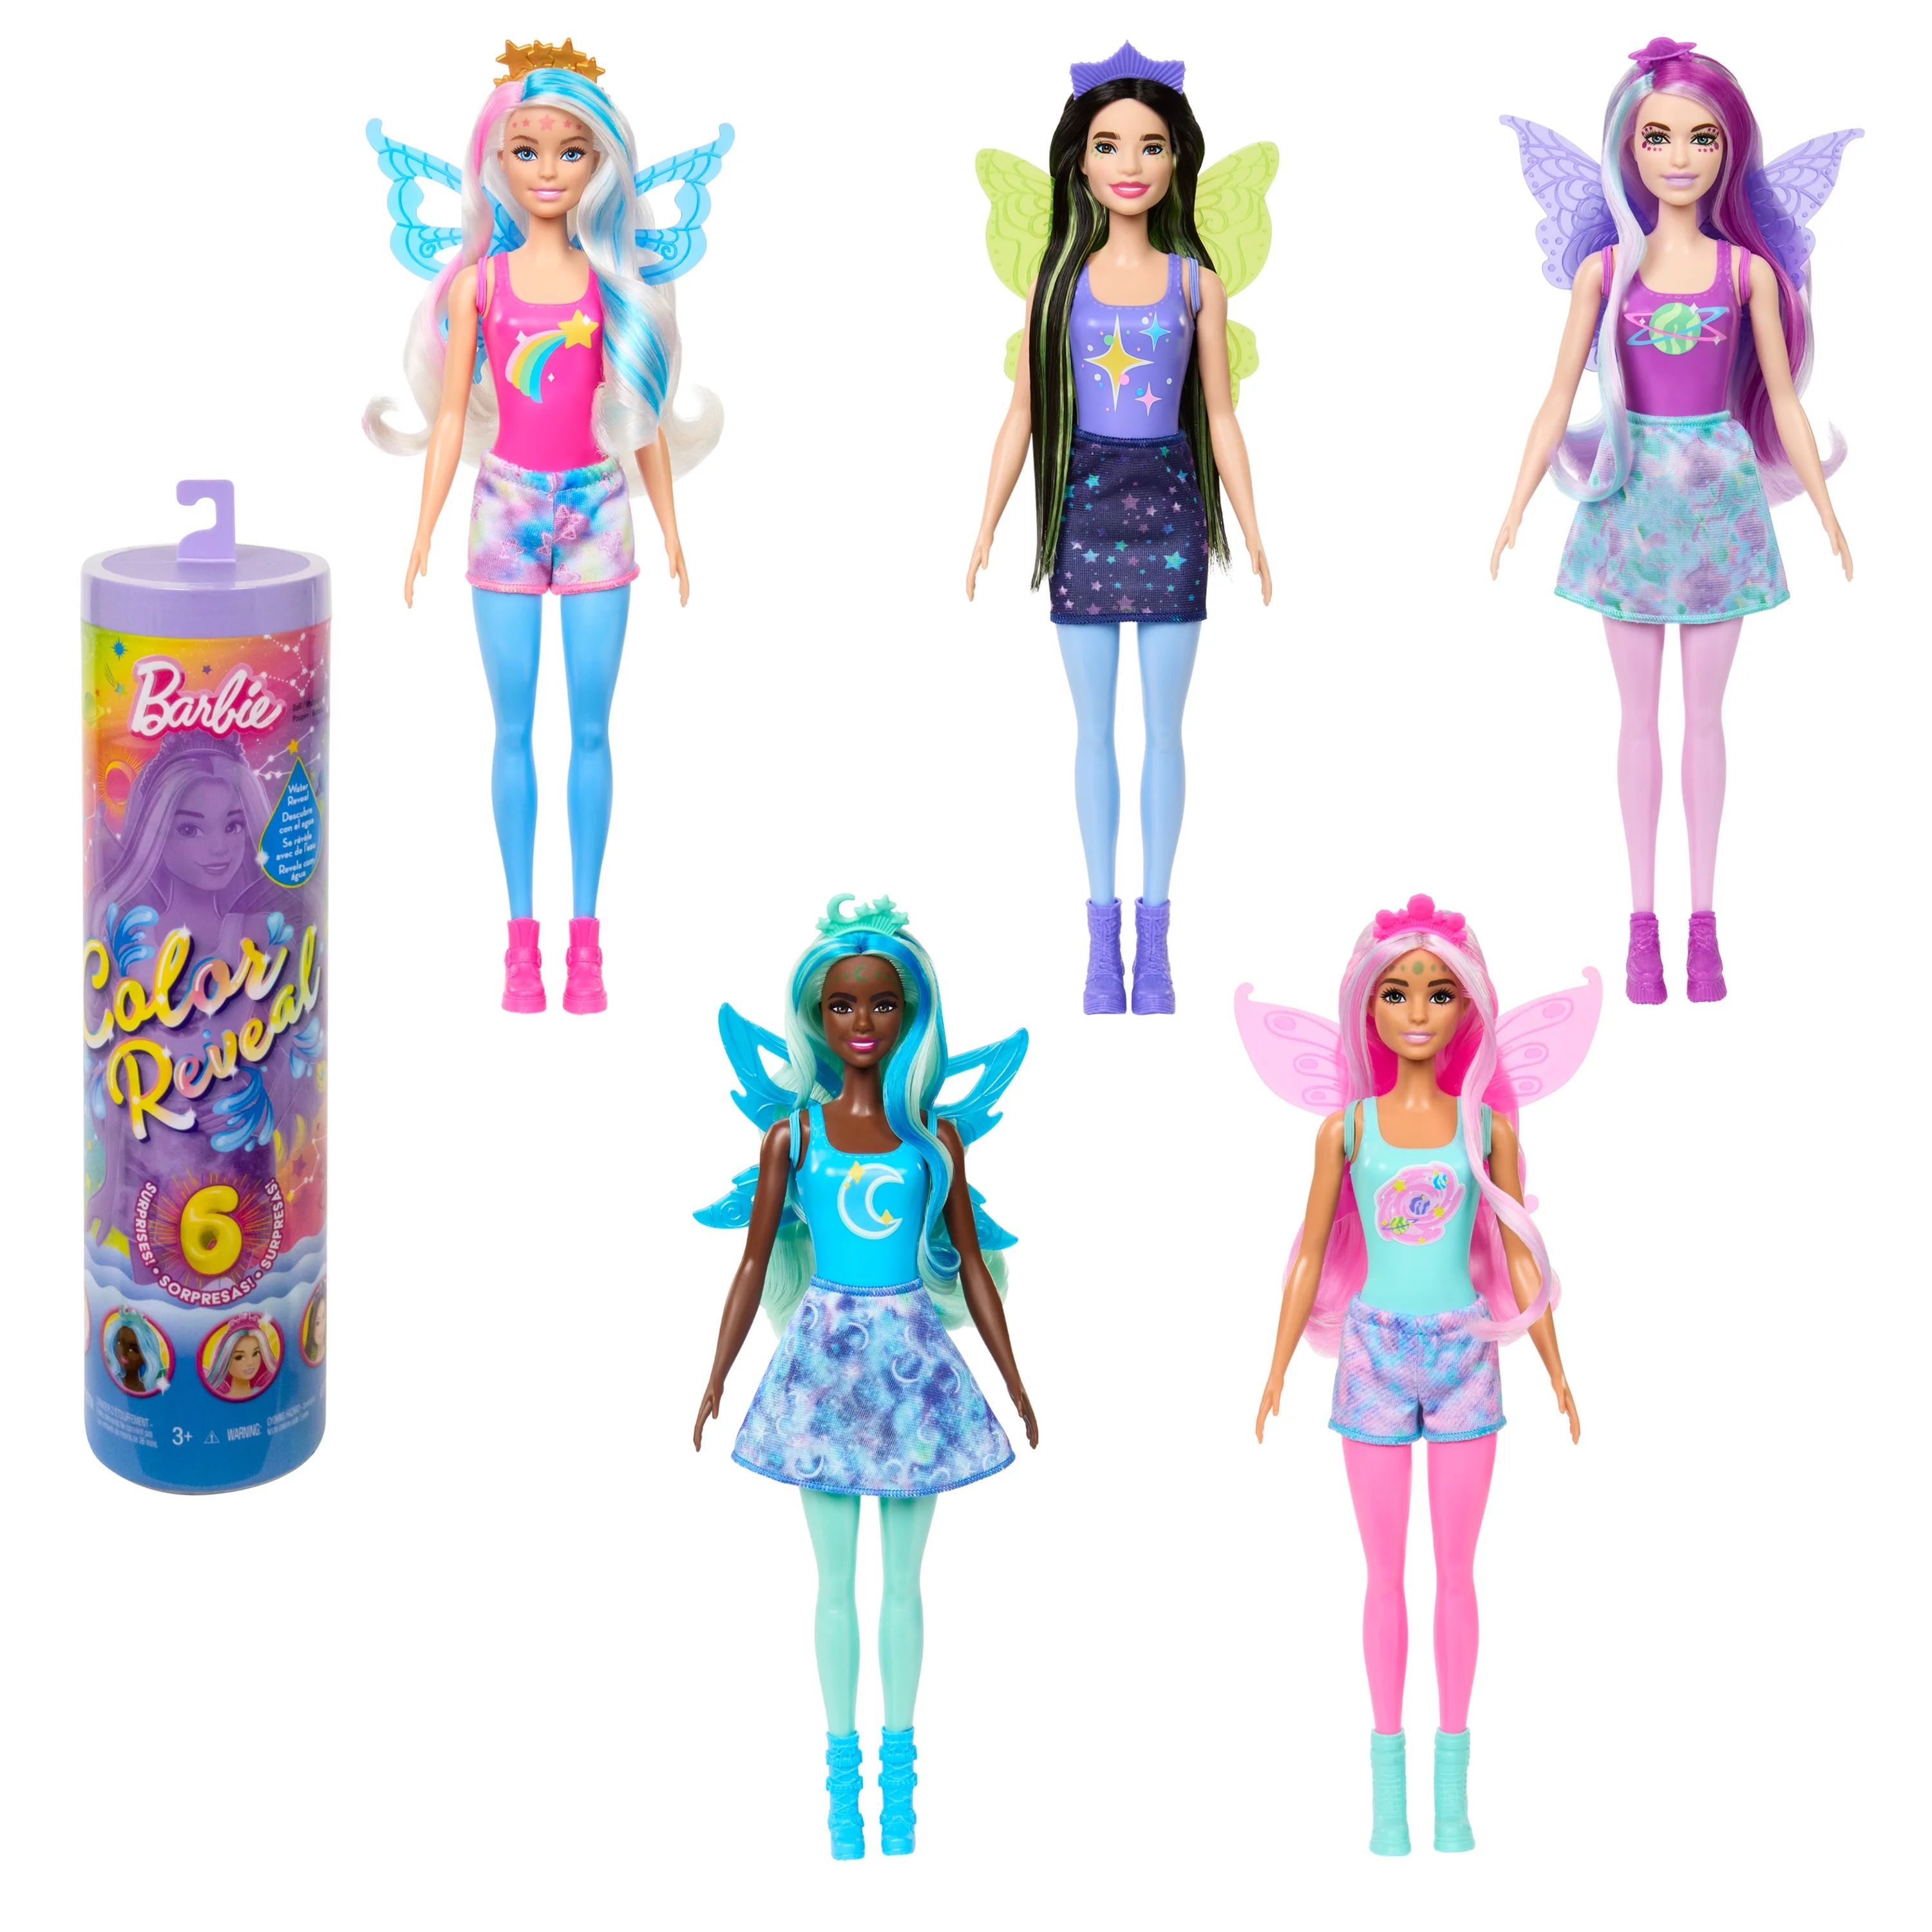 Barbie Color Reveal Doll with 6 Surprises, Rainbow Galaxy Series | Walmart (US)